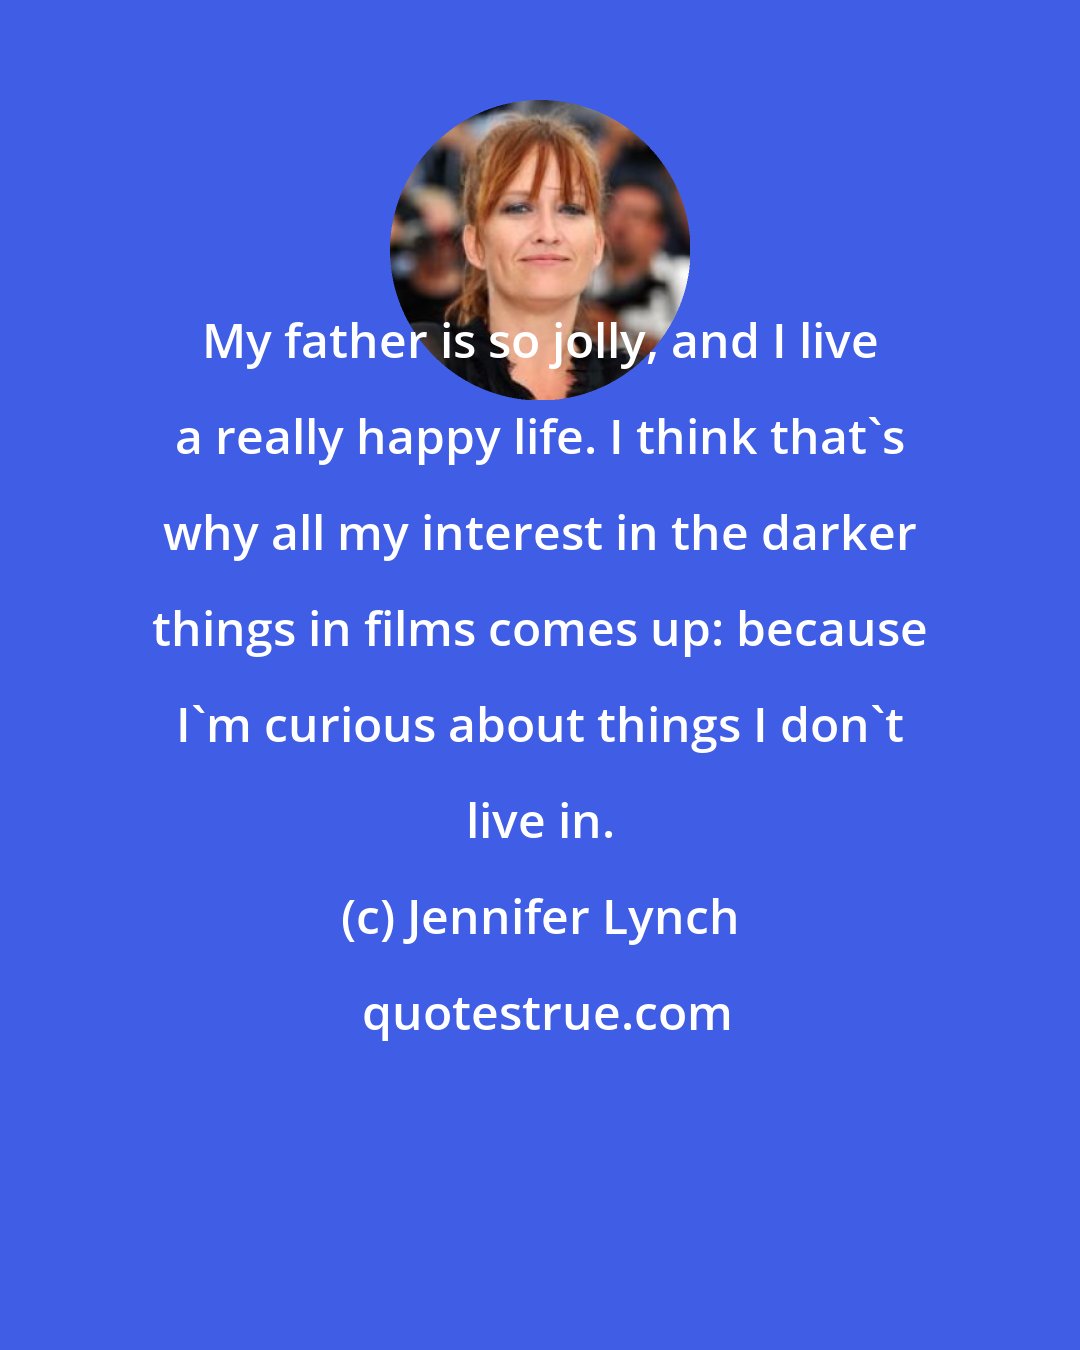 Jennifer Lynch: My father is so jolly, and I live a really happy life. I think that's why all my interest in the darker things in films comes up: because I'm curious about things I don't live in.